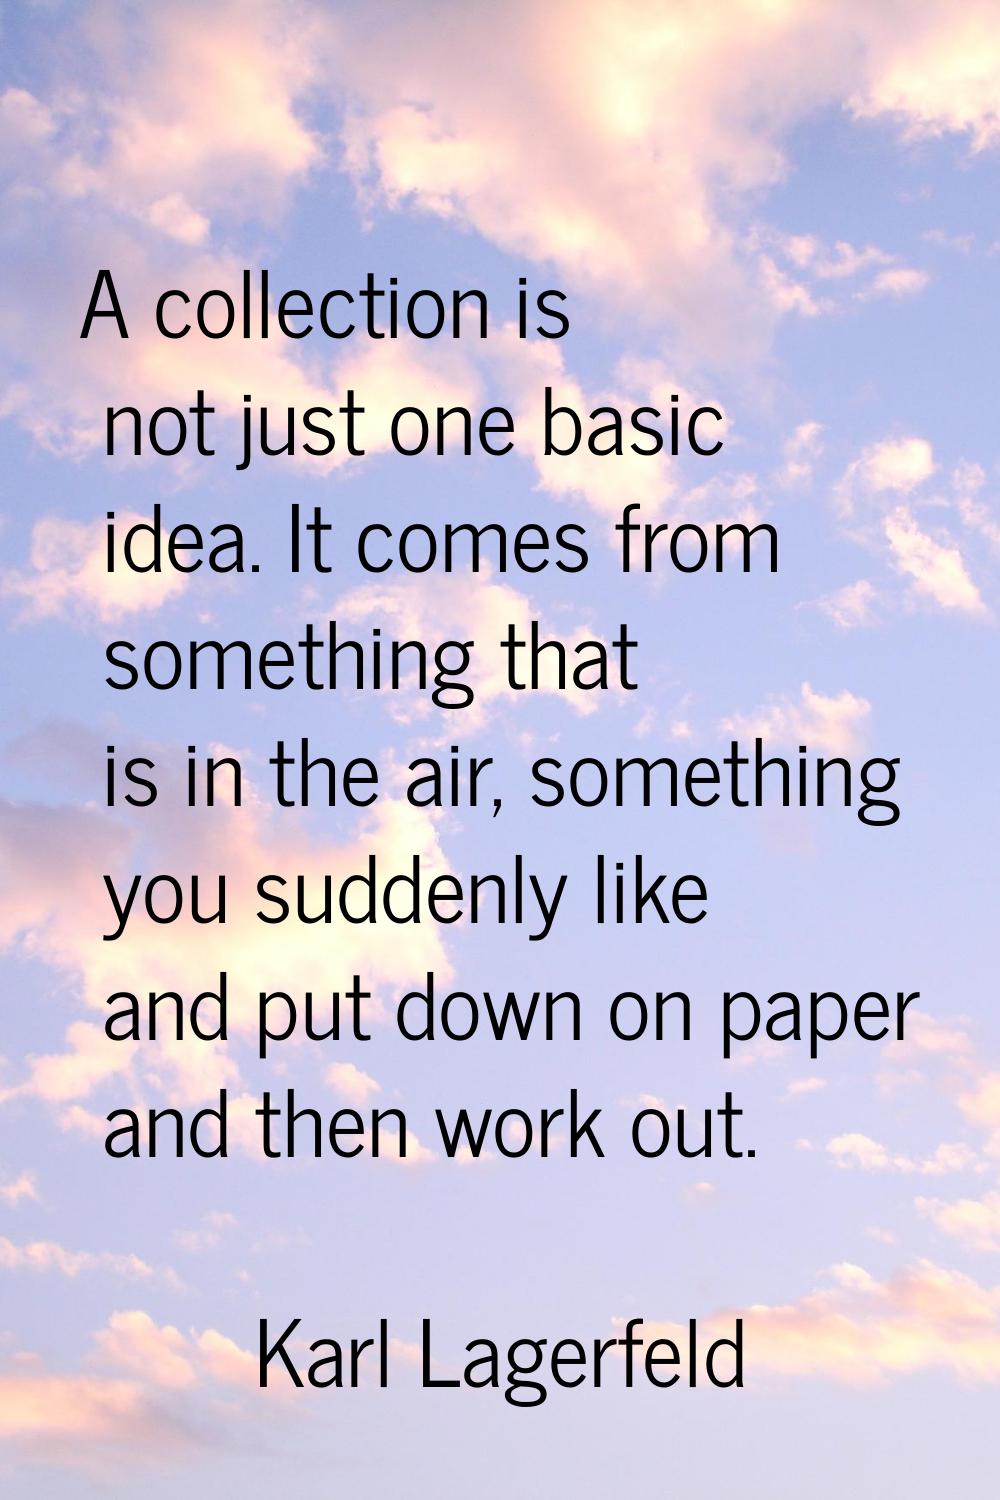 A collection is not just one basic idea. It comes from something that is in the air, something you 